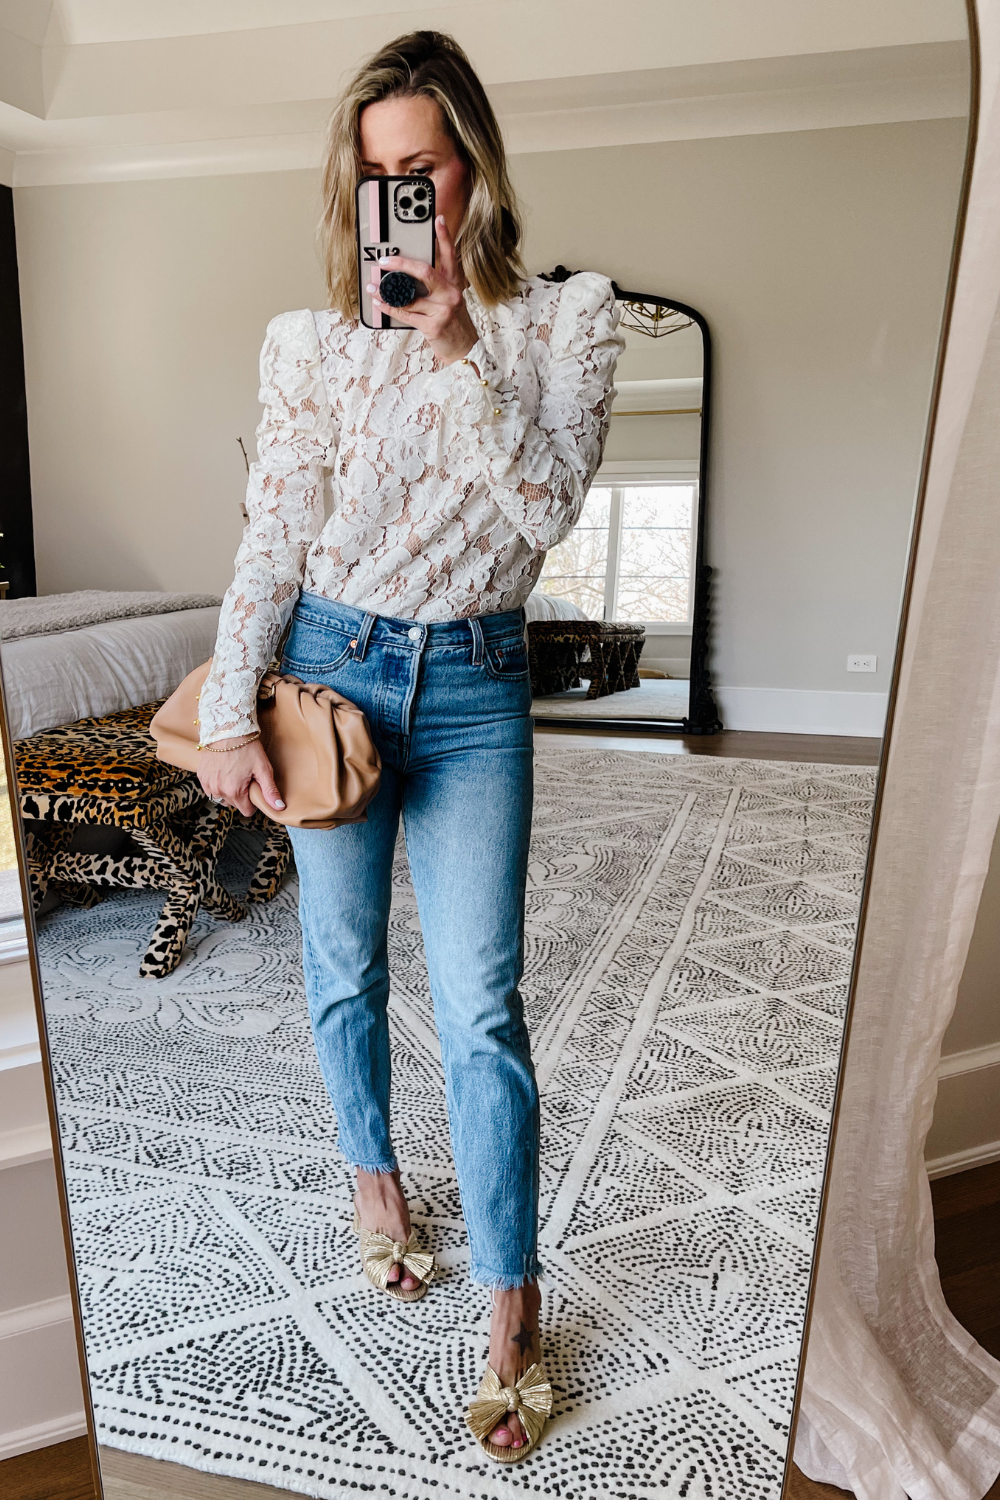 Suzanne wearing a white lace blouse, denim jeans, and gold slides